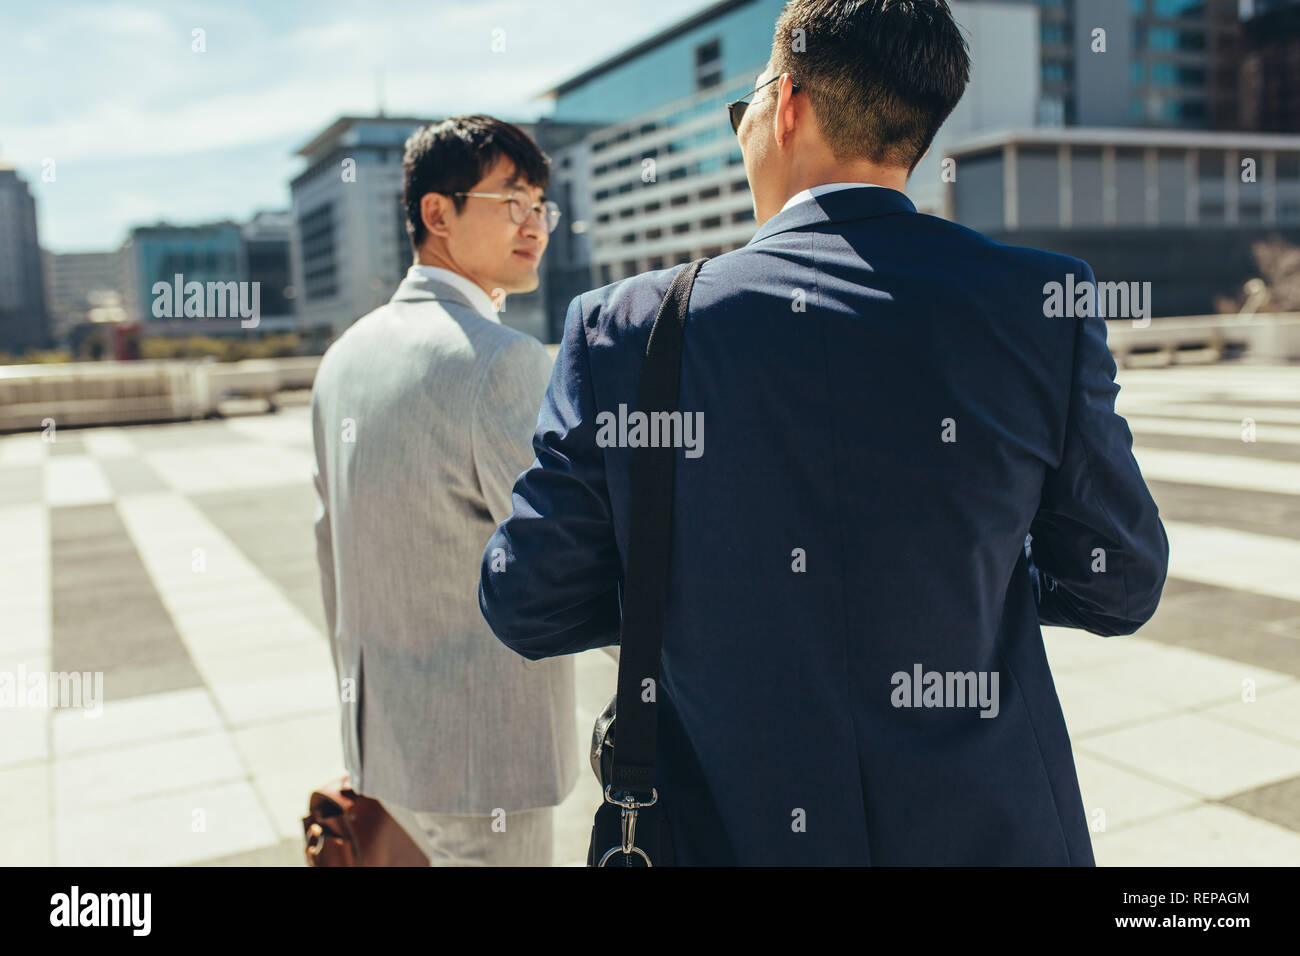 Rear view of two business people walking and talking together outdoors in the city. Two businessmen talking and walking in the city. Stock Photo